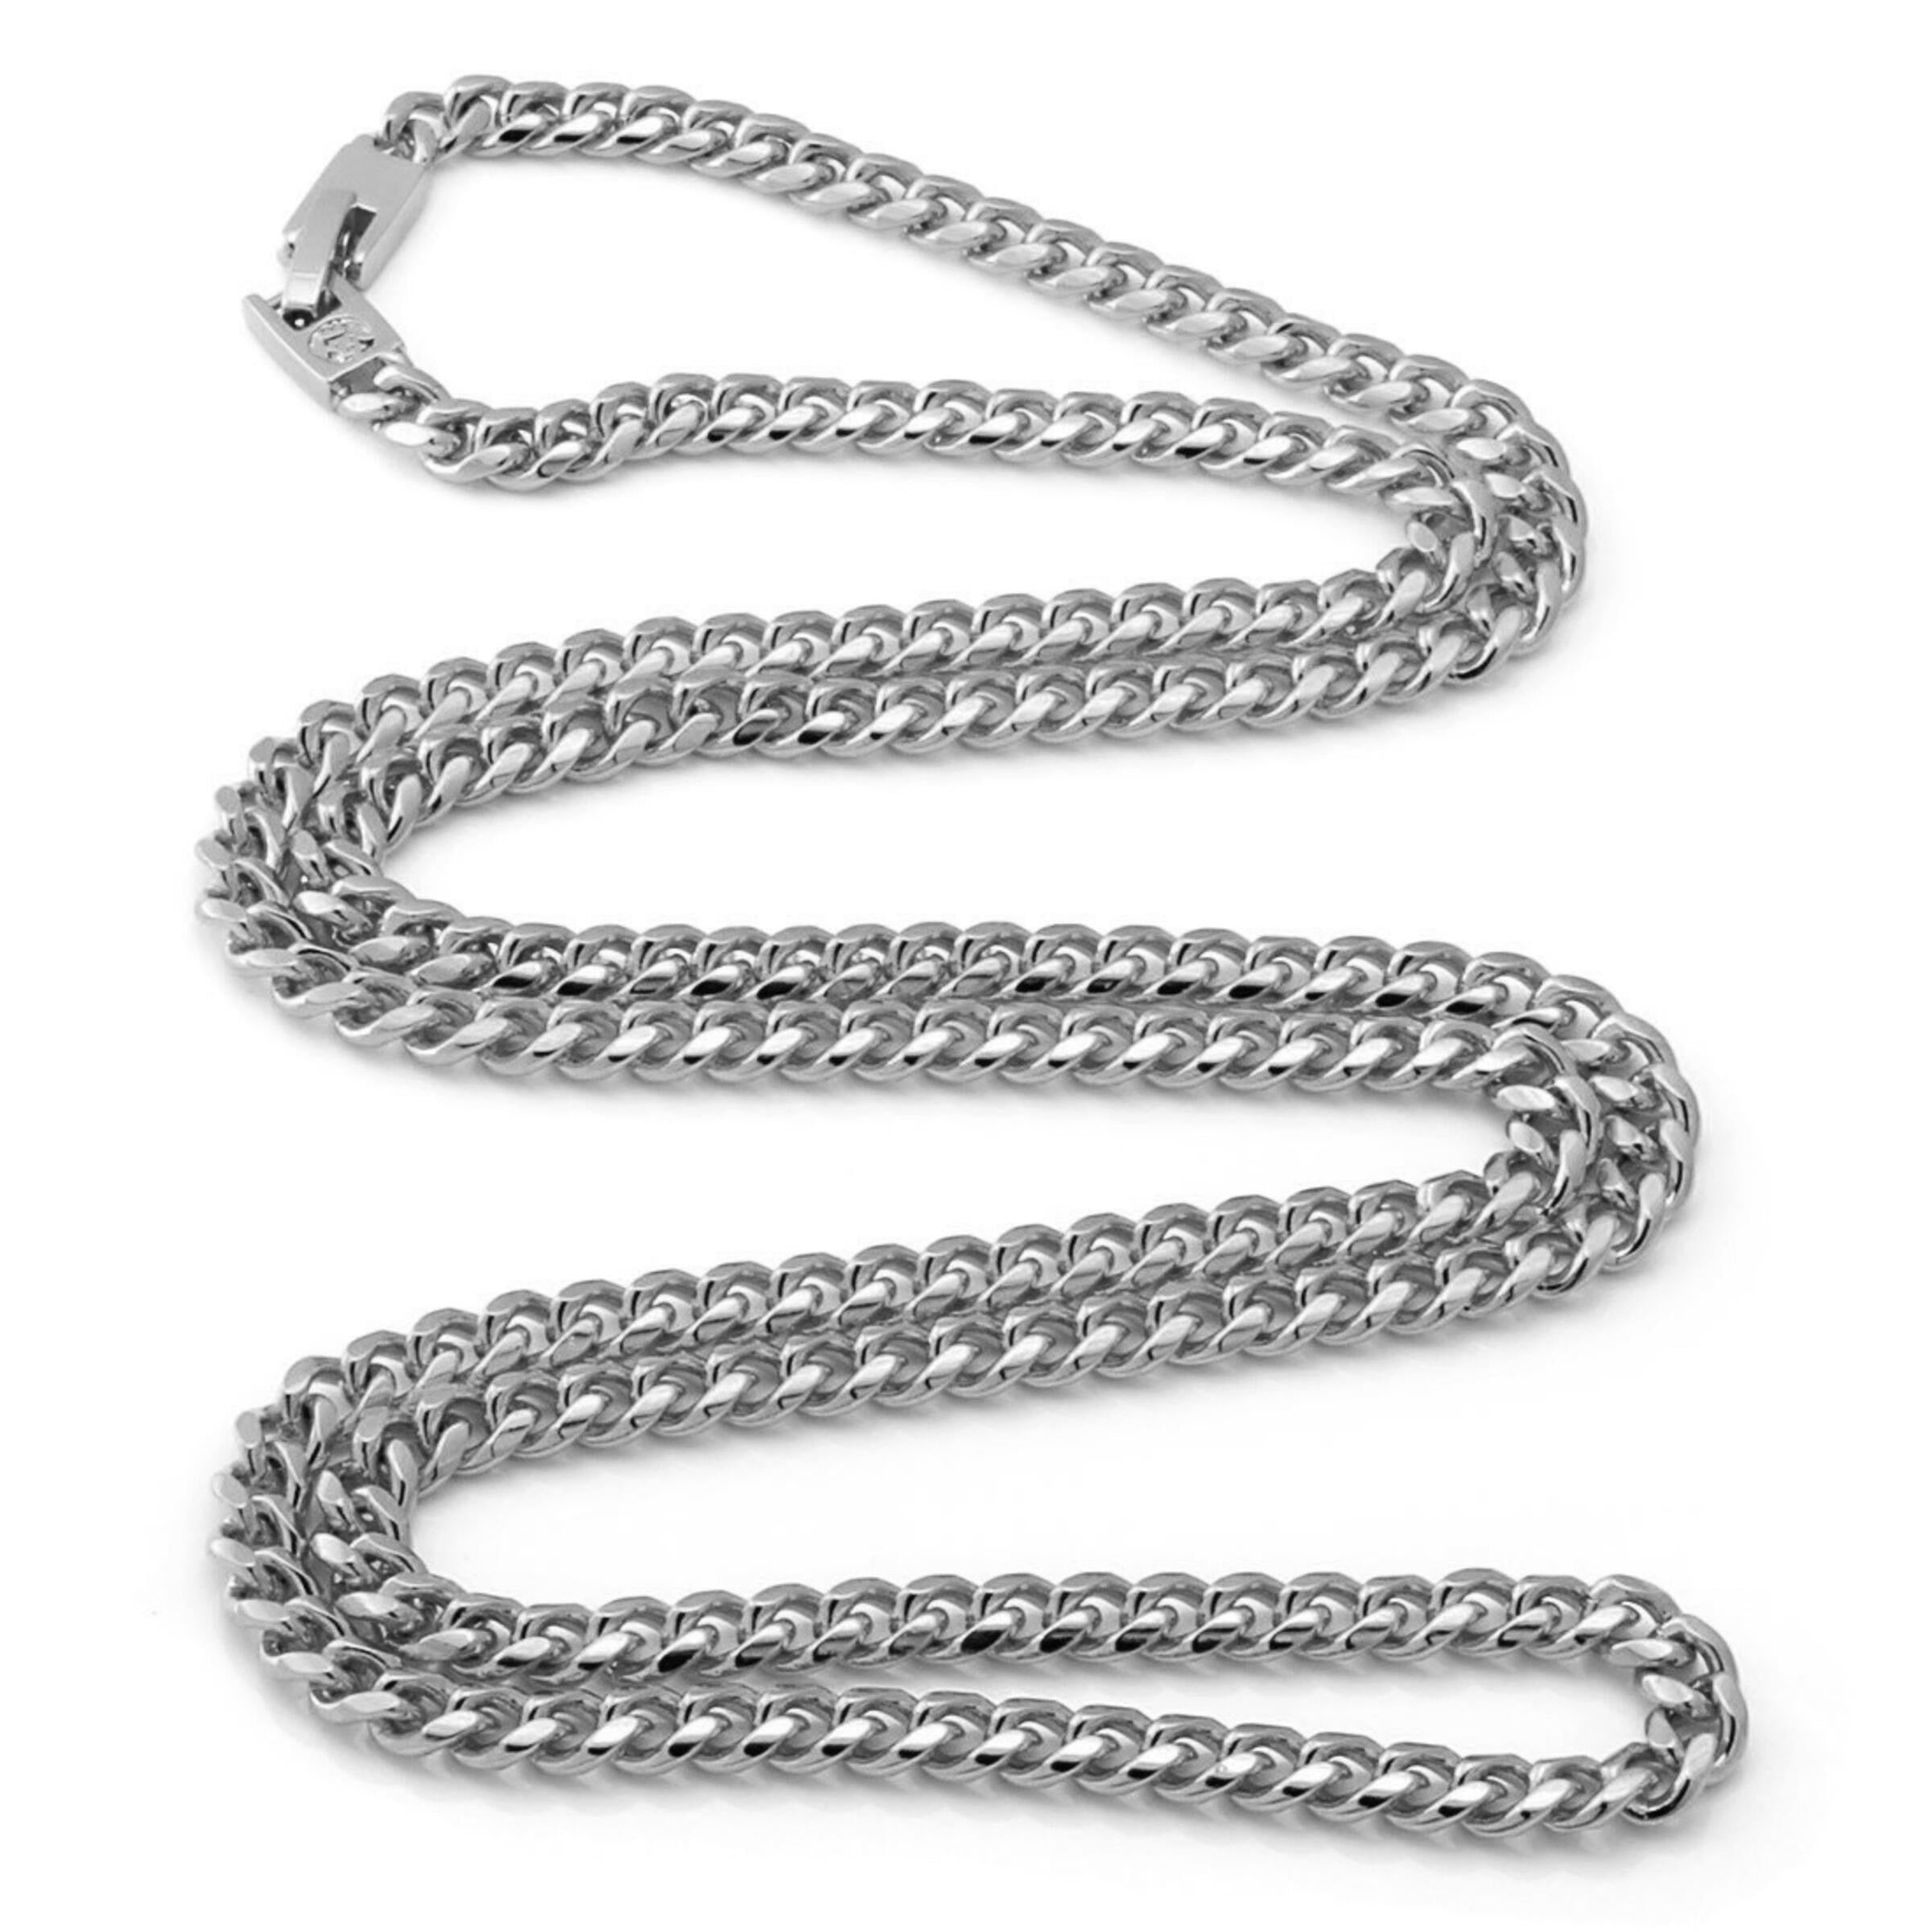 King Ice 5mm Miami Cuban Link Chain - White Gold